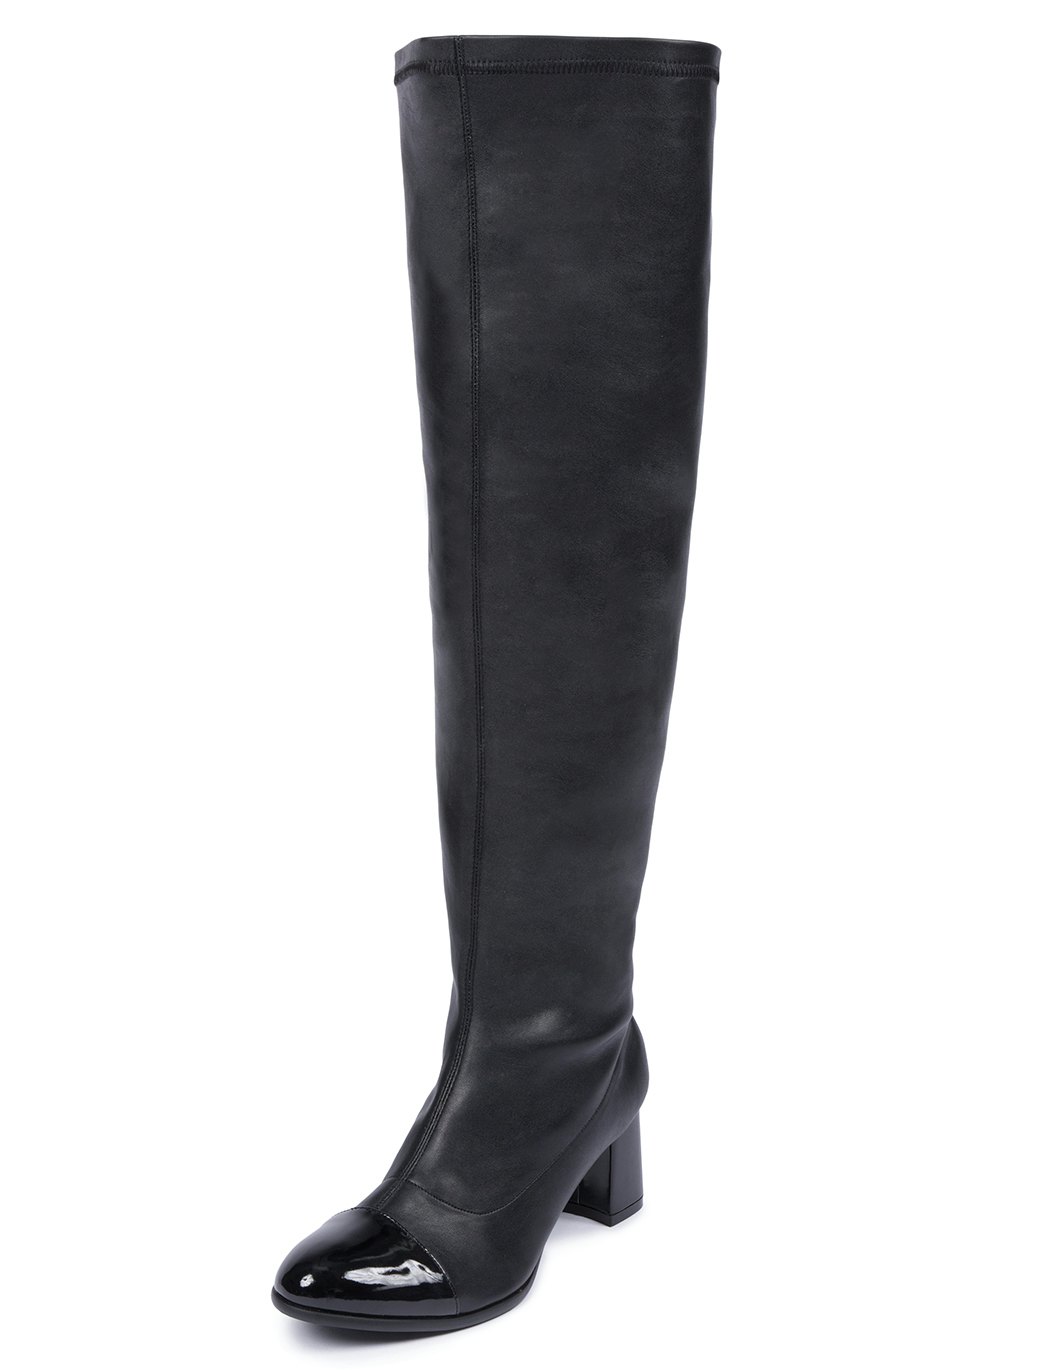 wide calf black leather high heel boots